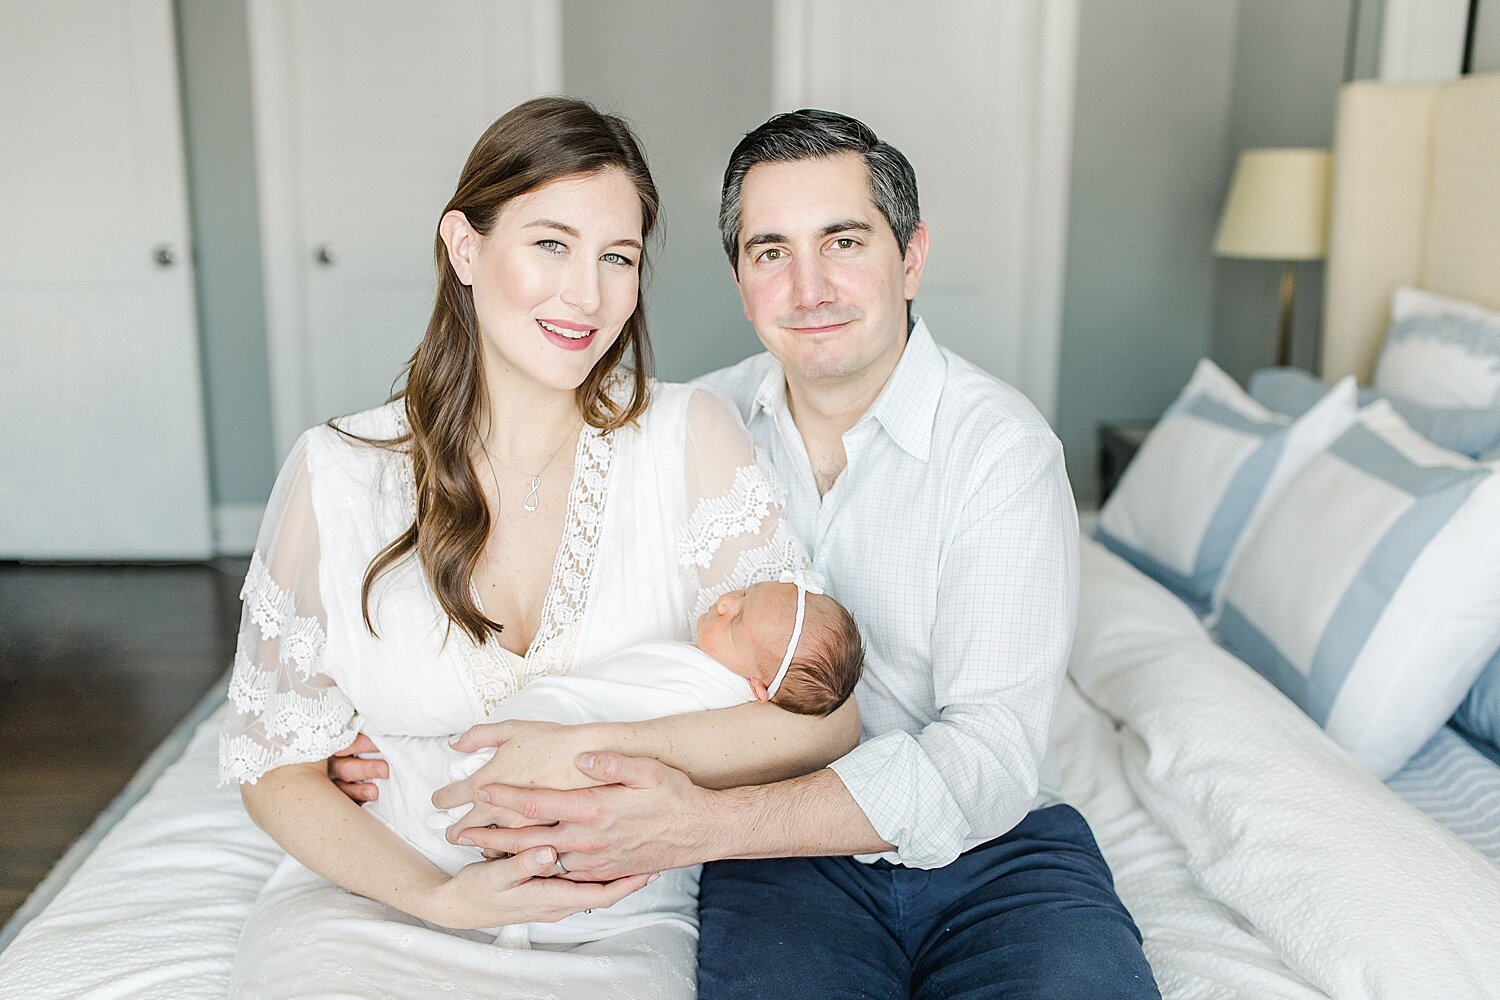 In-Home Lifestyle Newborn Session in Darien, CT with Kristin Wood Photography.